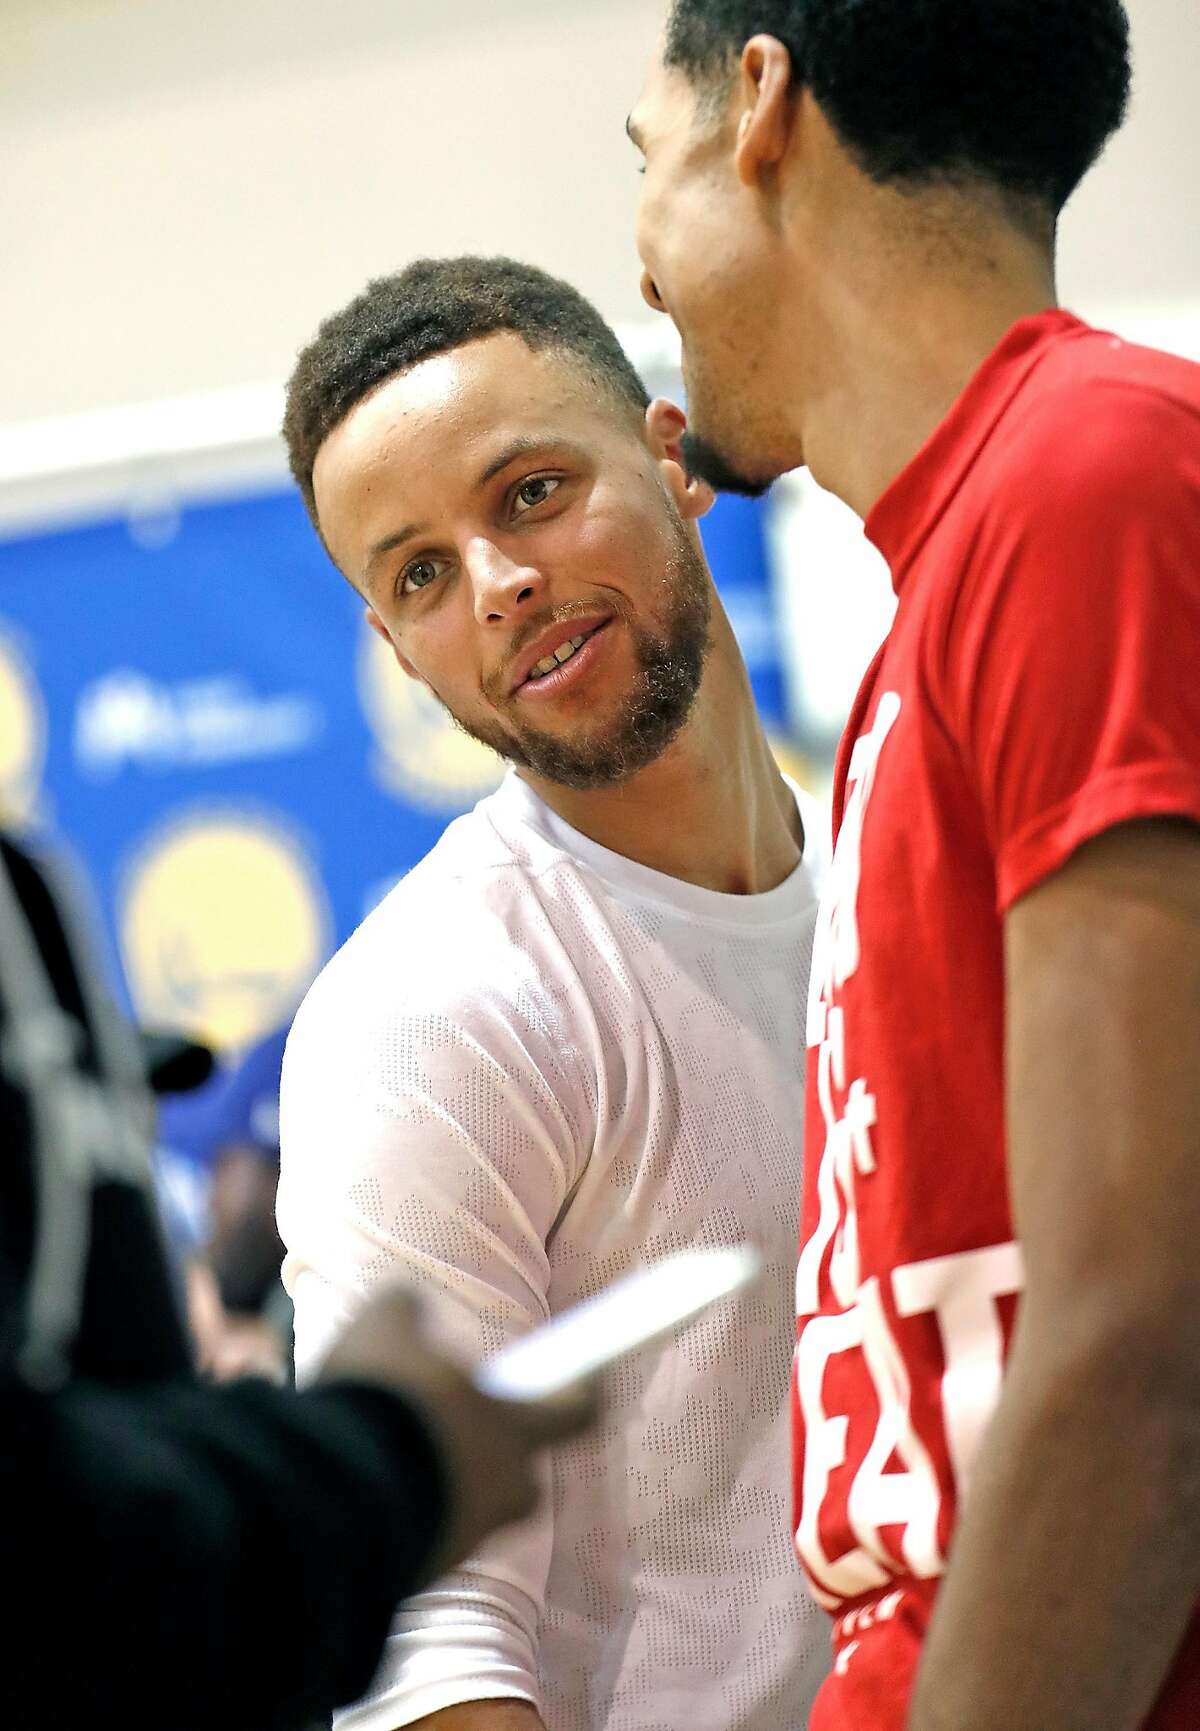 Golden State Warriors' Stephen Curry and Shaun Livingston during media availability at the Warriors' practice facility in Oakland, Calif., on Wednesday, June 14, 2017.